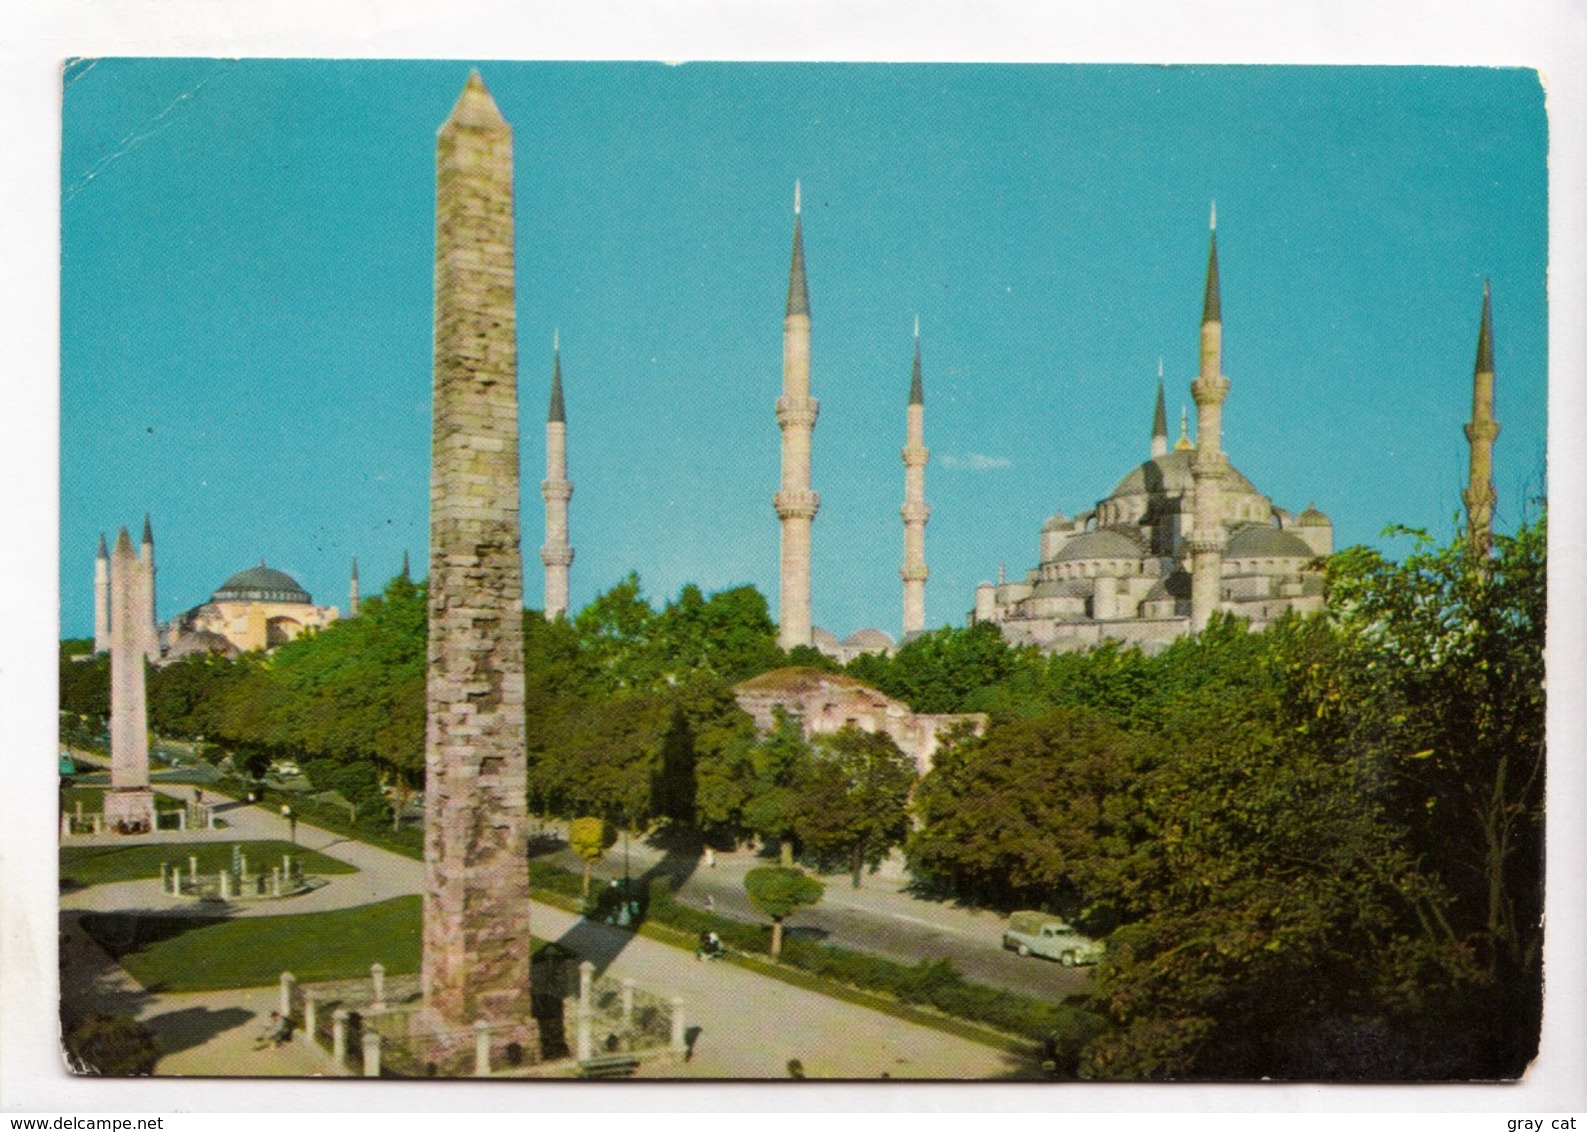 ISTANBUL, The Blue Mosque, 1968 Used Postcard [23826] - Turkey